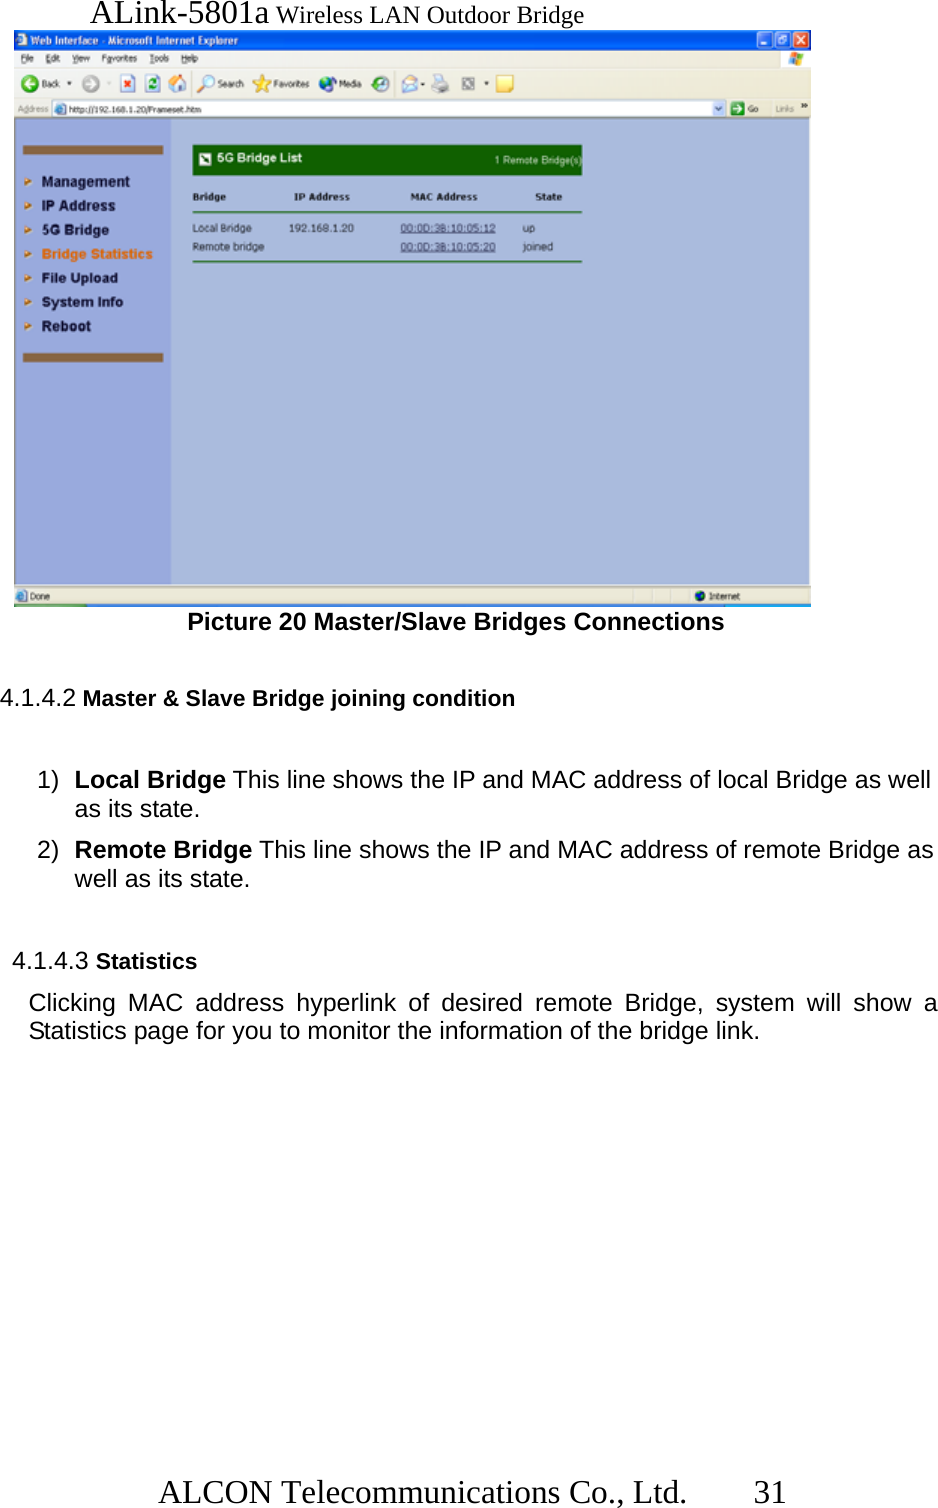   ALink-5801a Wireless LAN Outdoor Bridge                  ALCON Telecommunications Co., Ltd.   31  Picture 20 Master/Slave Bridges Connections    4.1.4.2 Master &amp; Slave Bridge joining condition  1)  Local Bridge This line shows the IP and MAC address of local Bridge as well as its state. 2)  Remote Bridge This line shows the IP and MAC address of remote Bridge as well as its state.  4.1.4.3 Statistics Clicking MAC address hyperlink of desired remote Bridge, system will show a Statistics page for you to monitor the information of the bridge link. 